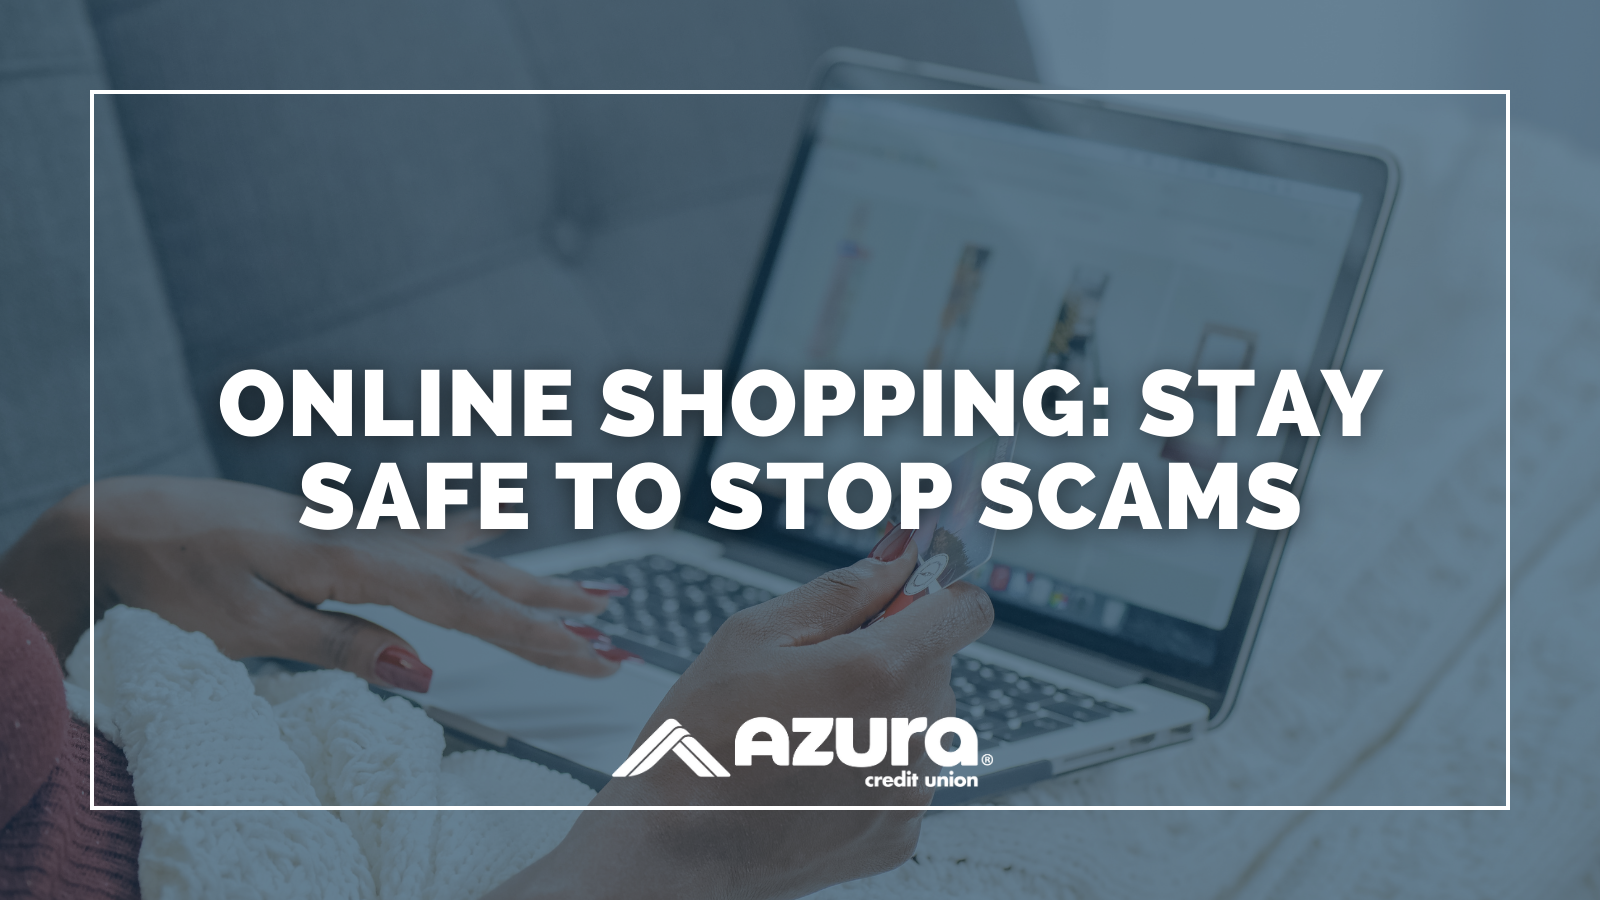 Online Shopping Scams: What to Look For and How to Stay Safe!